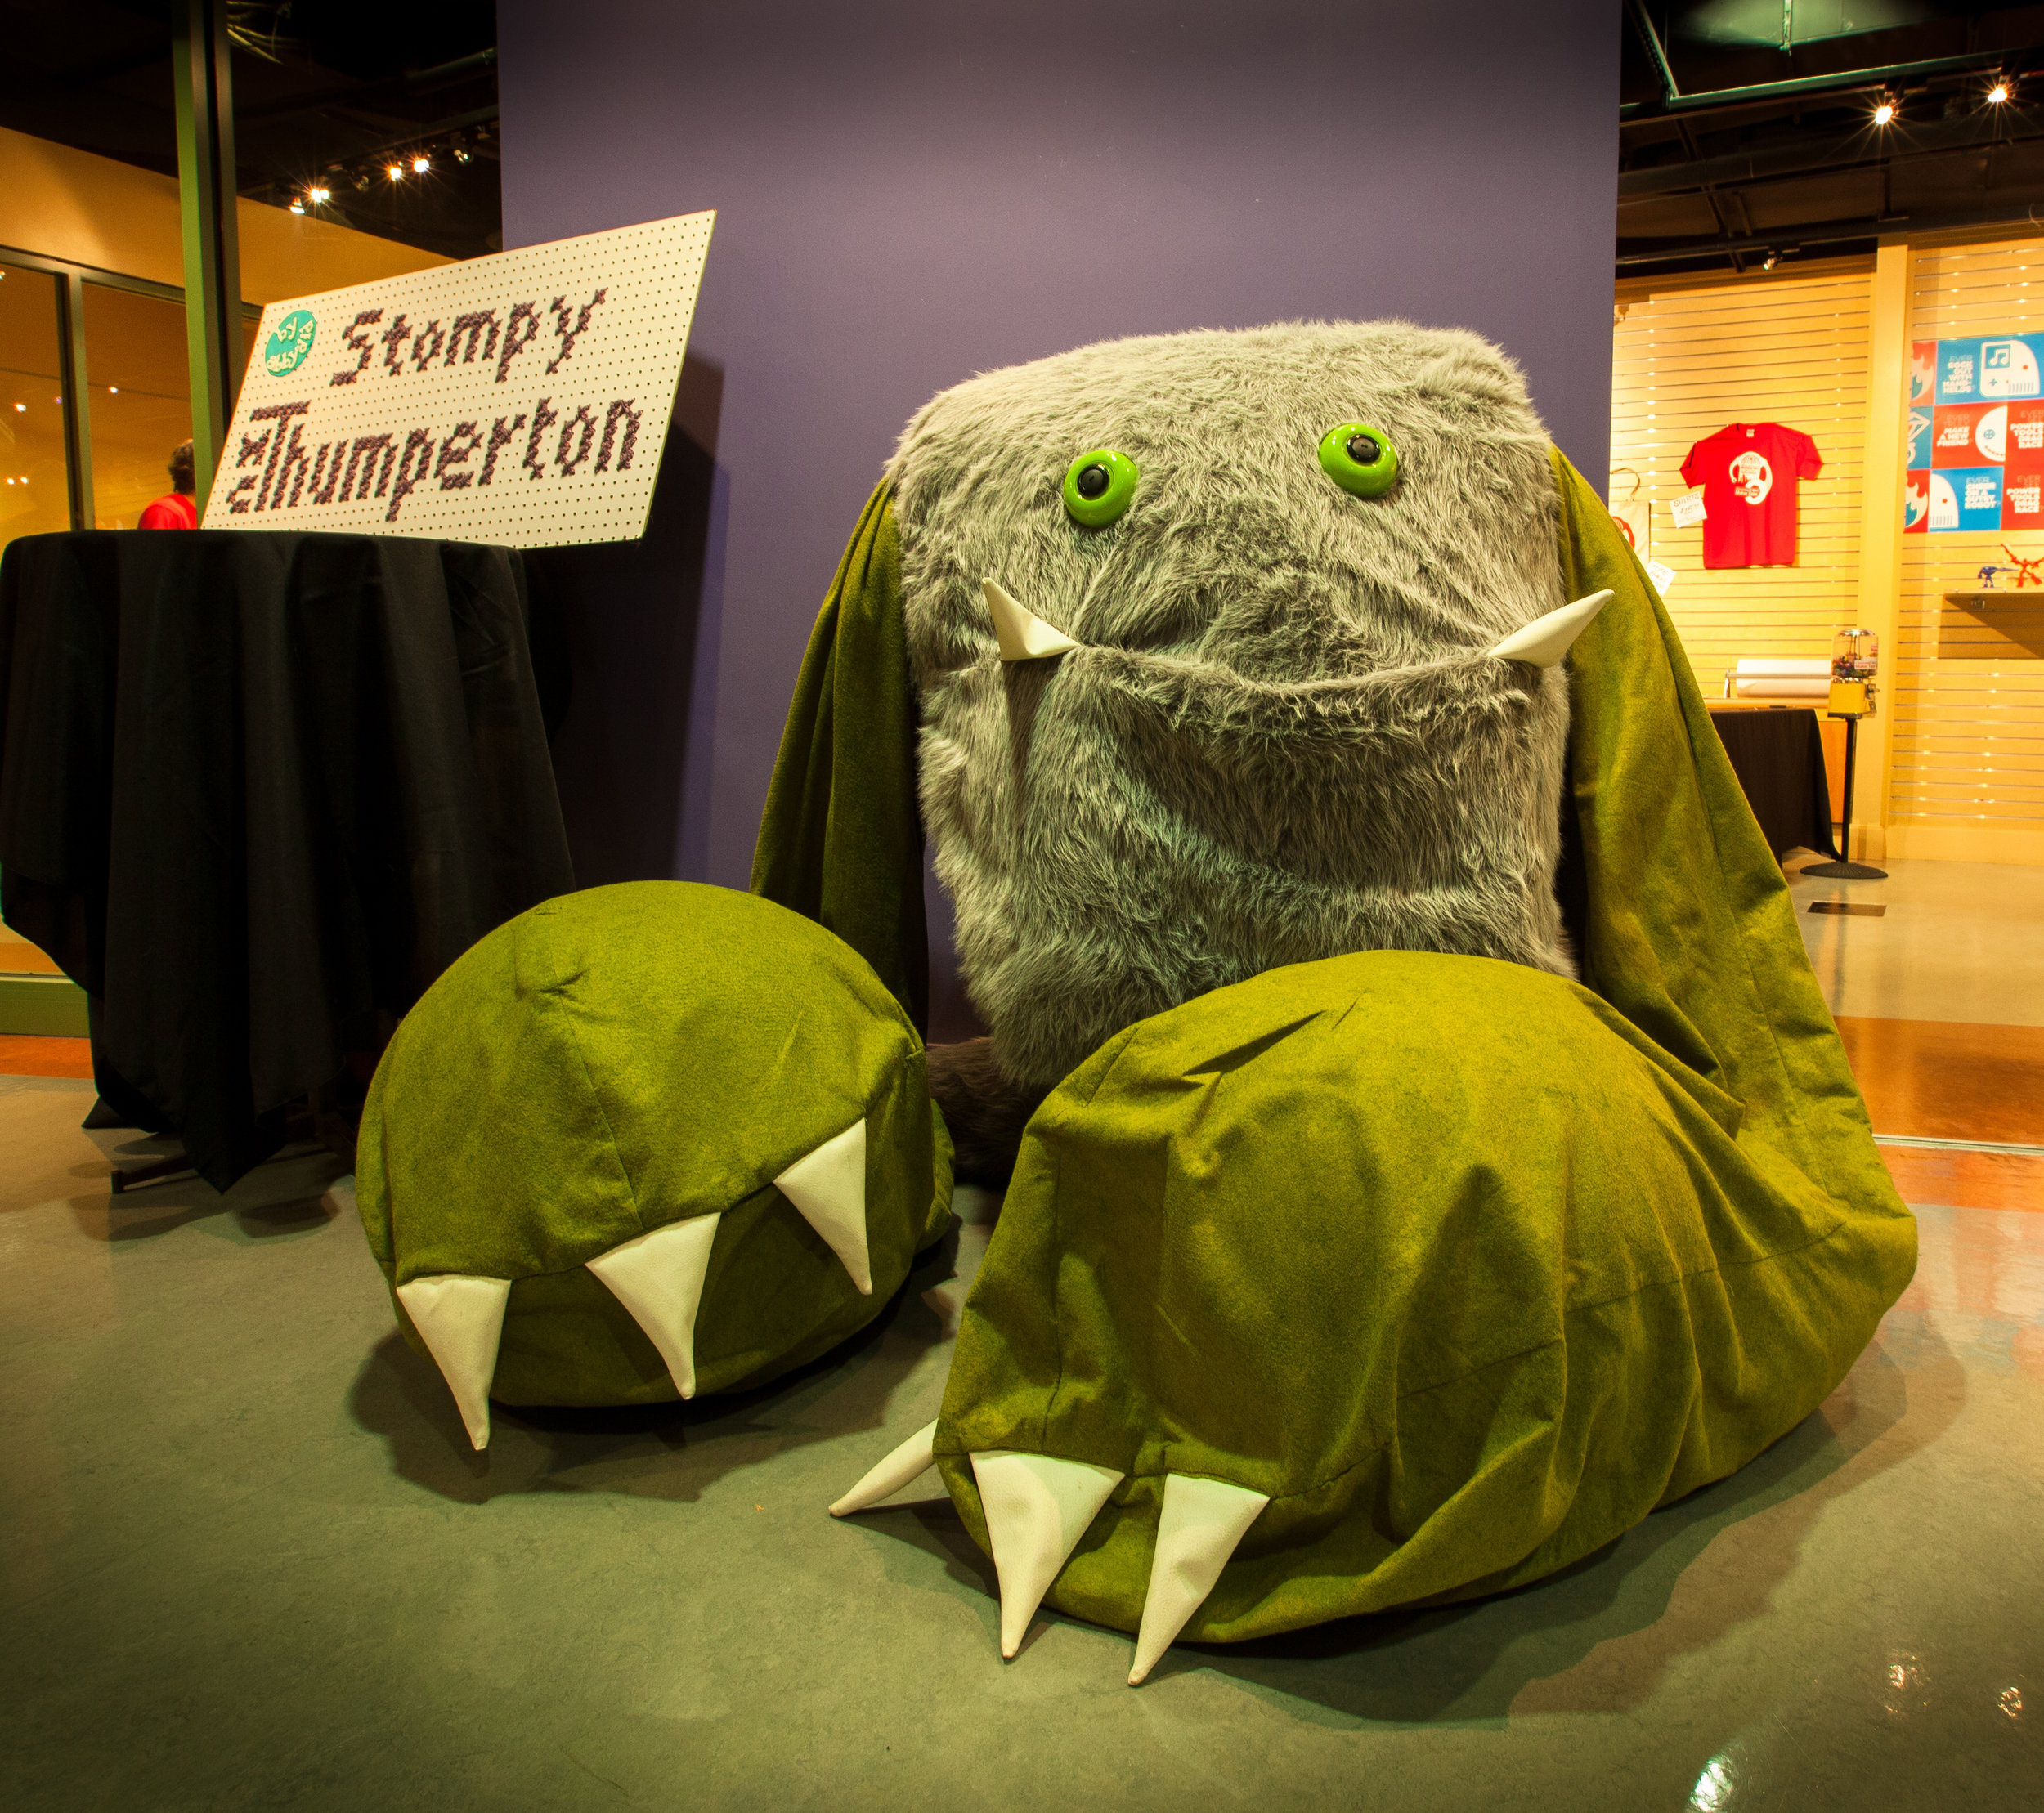  After a day of playing at Maker Faire, Stompy was feeling a bit disheveled.&nbsp; 